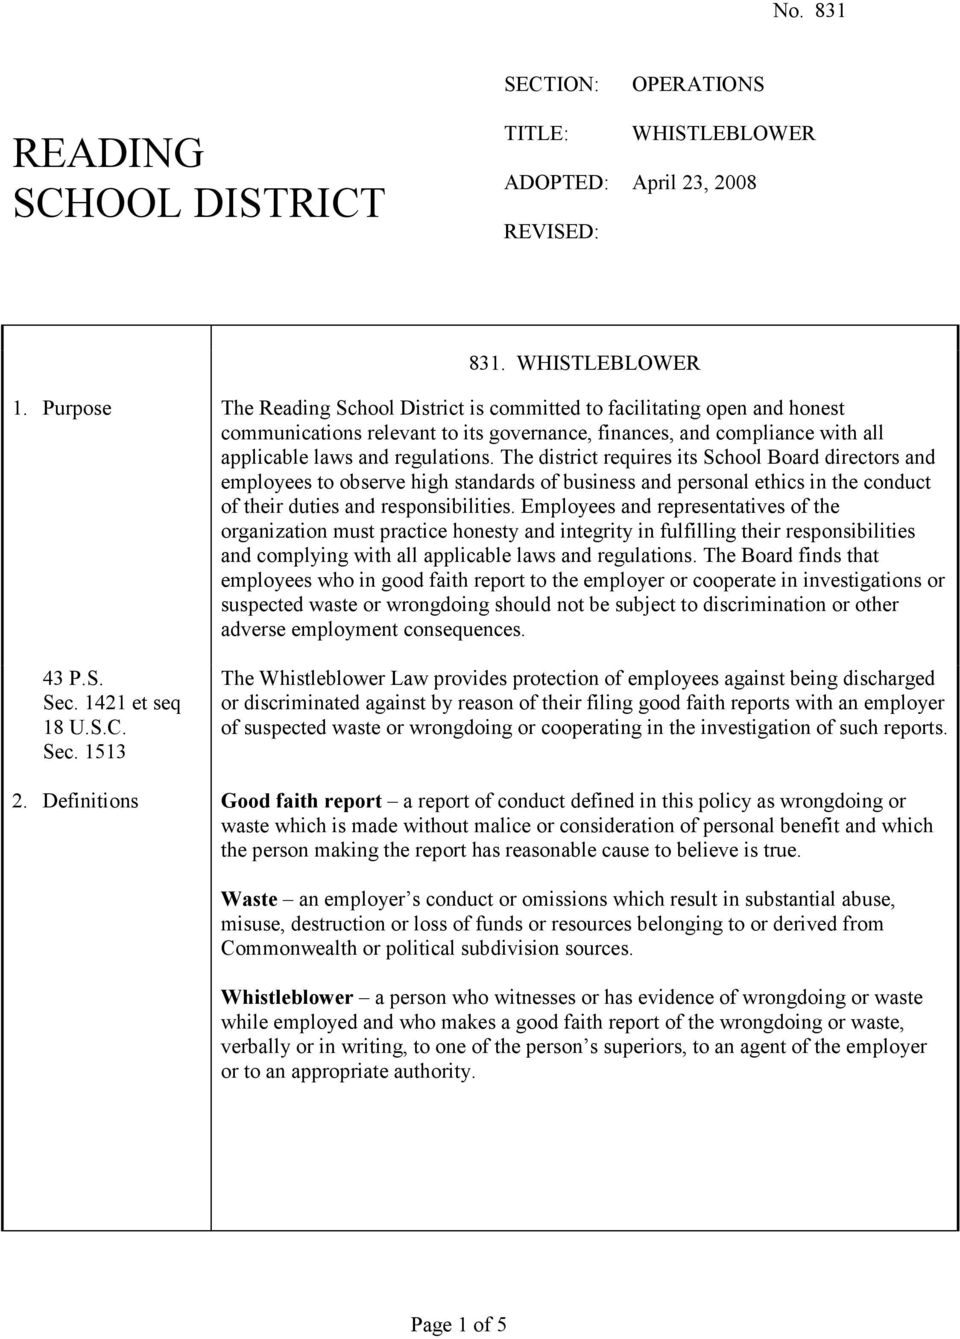 The district requires its School Board directors and employees to observe high standards of business and personal ethics in the conduct of their duties and responsibilities.